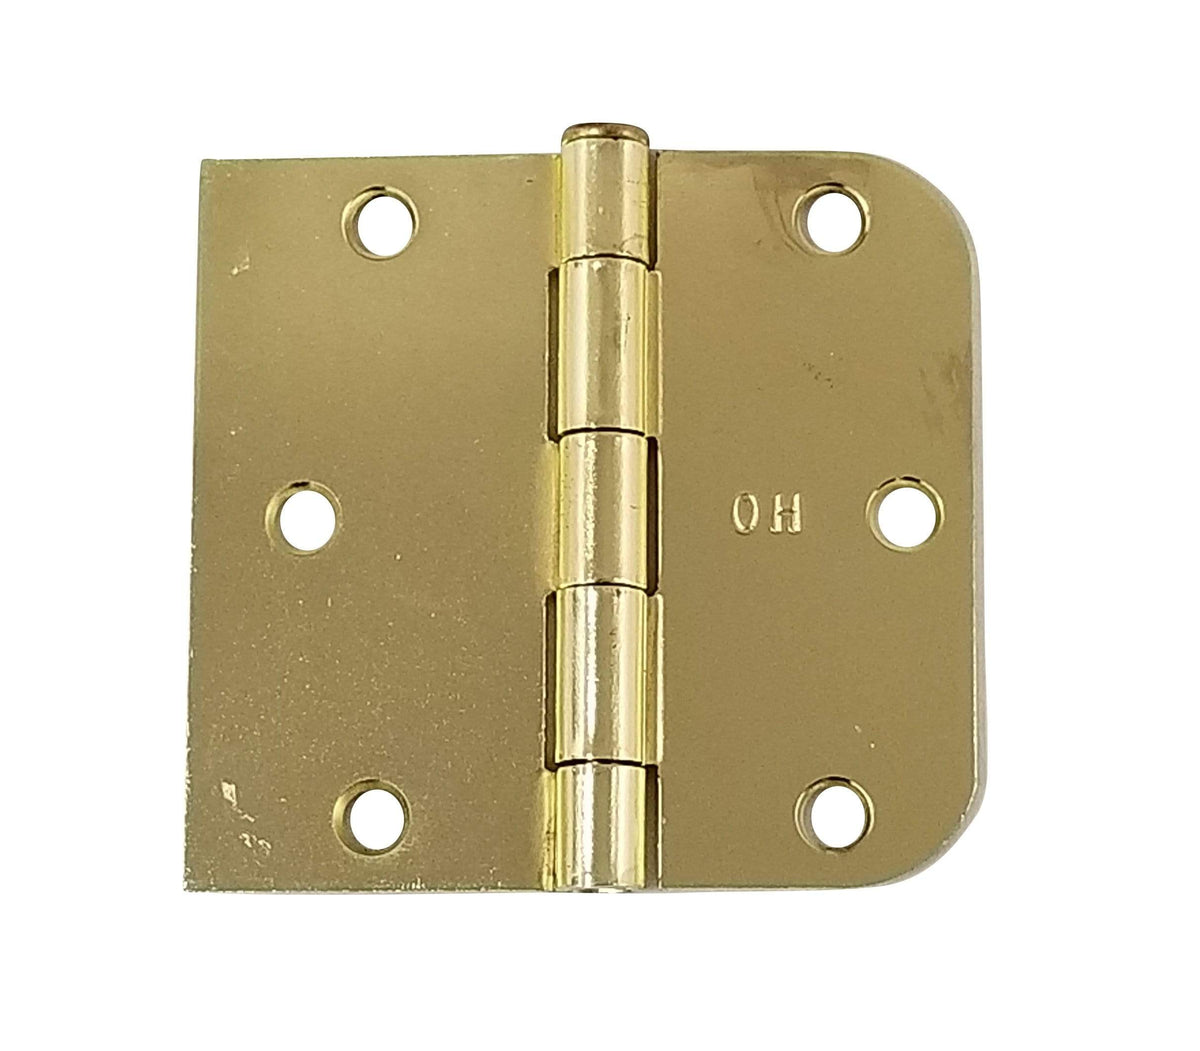 Interior Door Hinges - 3.5 Inch With 5/8 Inch Square - Multiple Finishes Available - 2 Pack